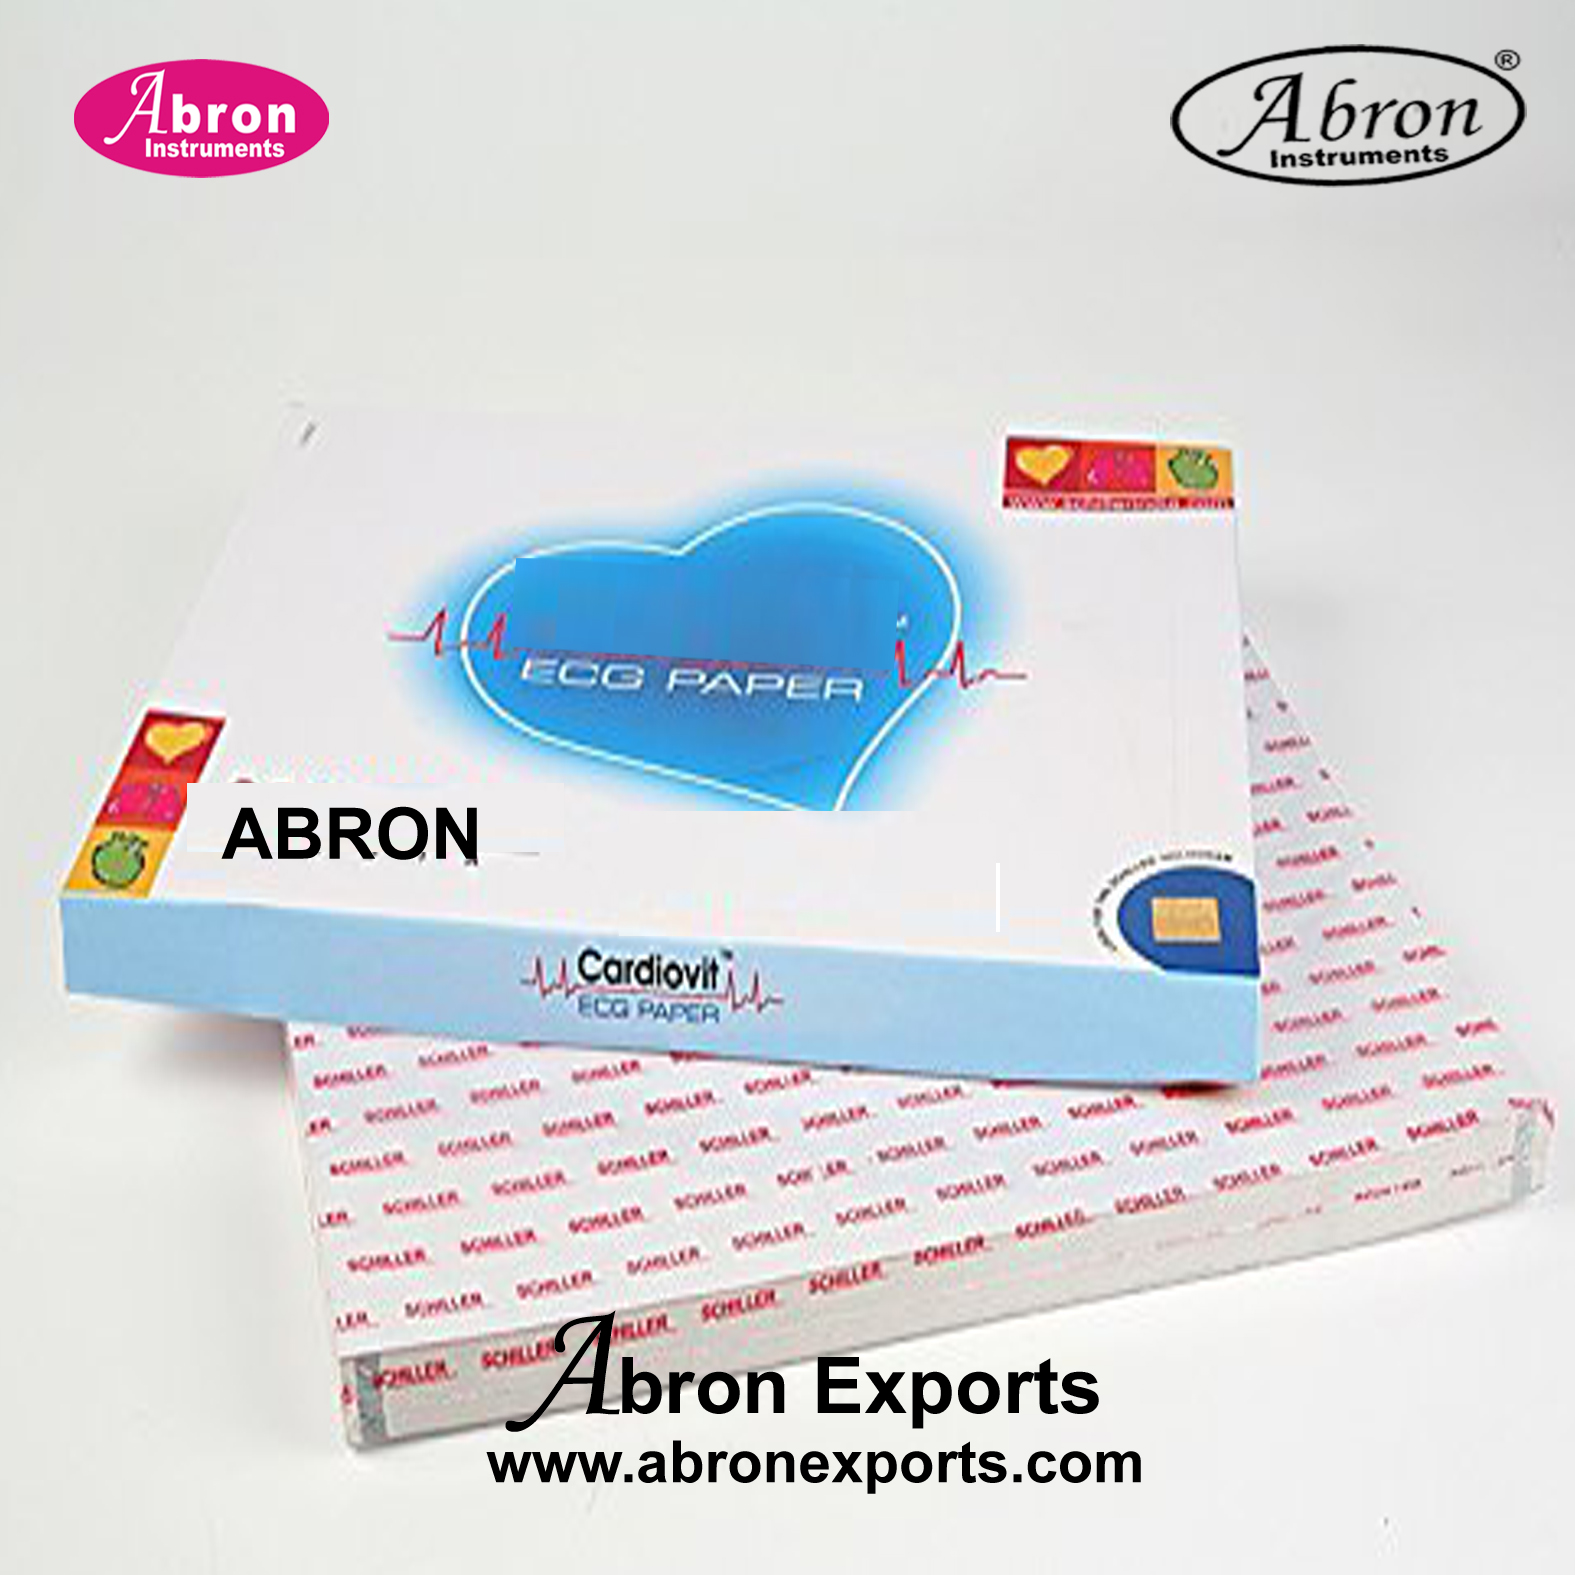 ECG Recording papers Sheets 210x280 mm paper pack Abron ABM-2501S 